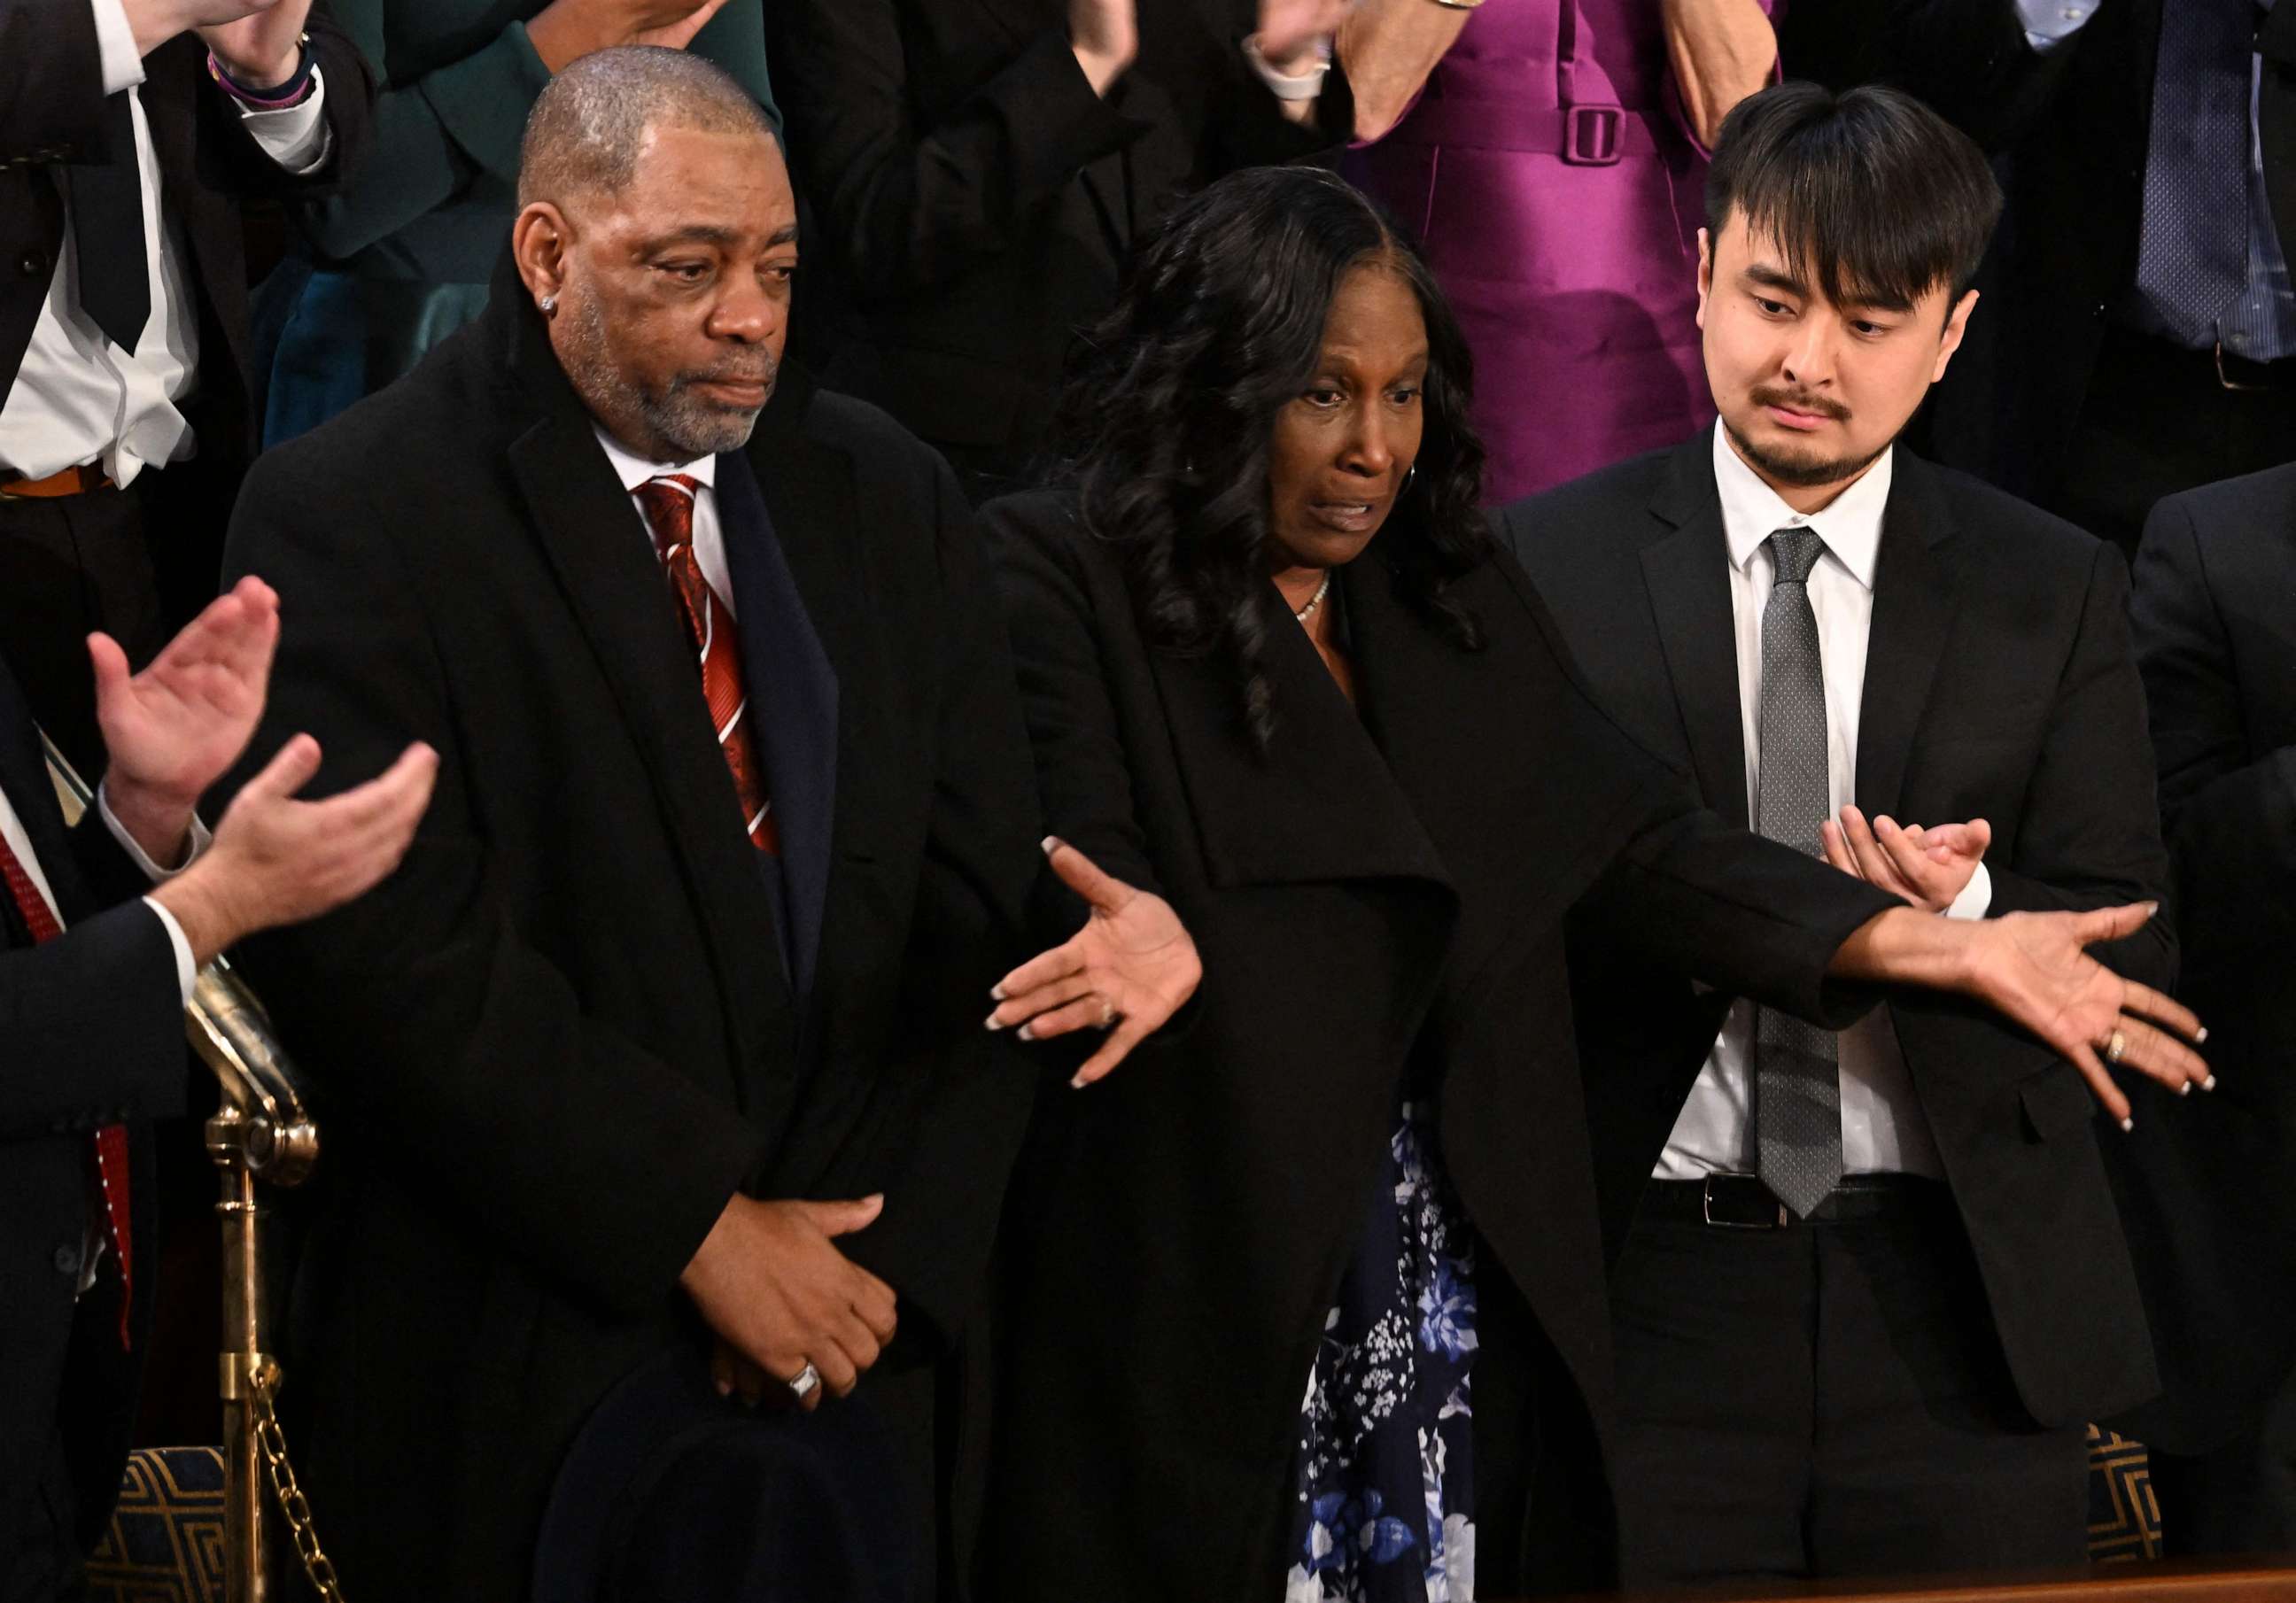 PHOTO: Rodney Wells (L) and RowVaughn Wells (2nd L), parents of Tyre Nichols, are applauded after President Joe Biden acknowledged them during the State of the Union address in the House Chamber of the Capitol in Washington, DC, on Feb. 7, 2023.